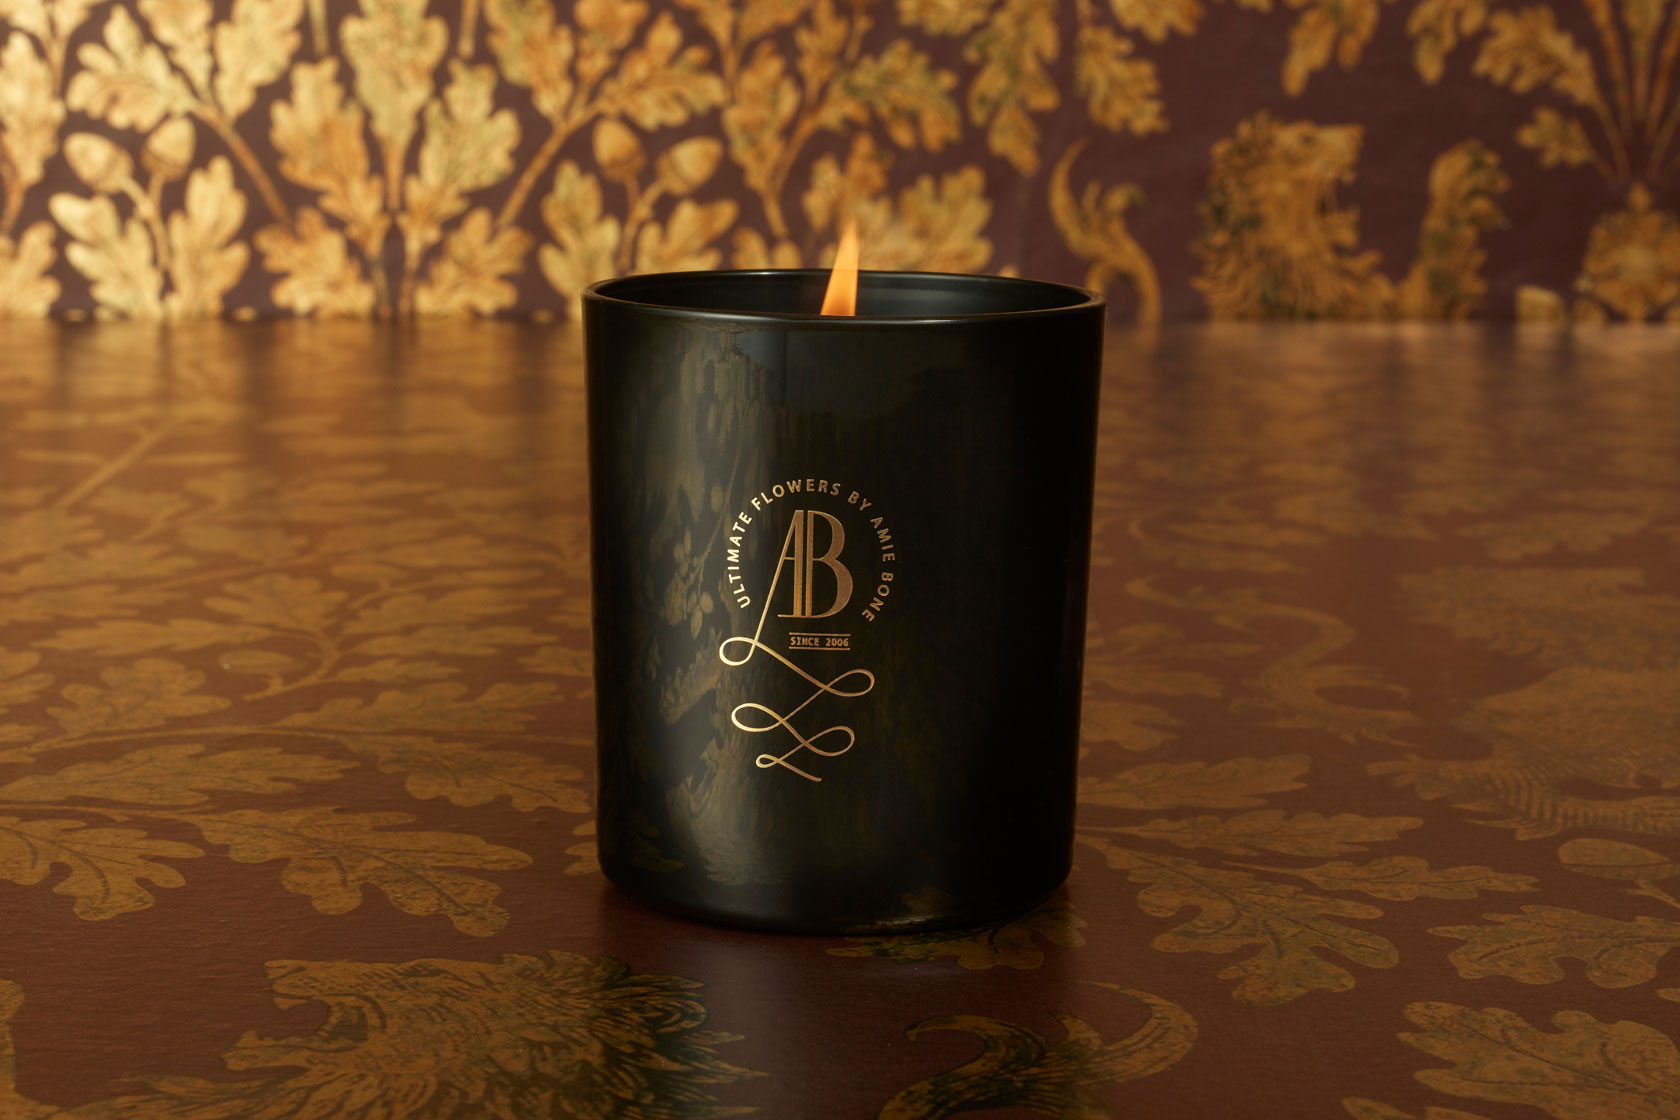 a black candle with an iconic gold crested logo sitting next to a black gift box tied in black ribbon